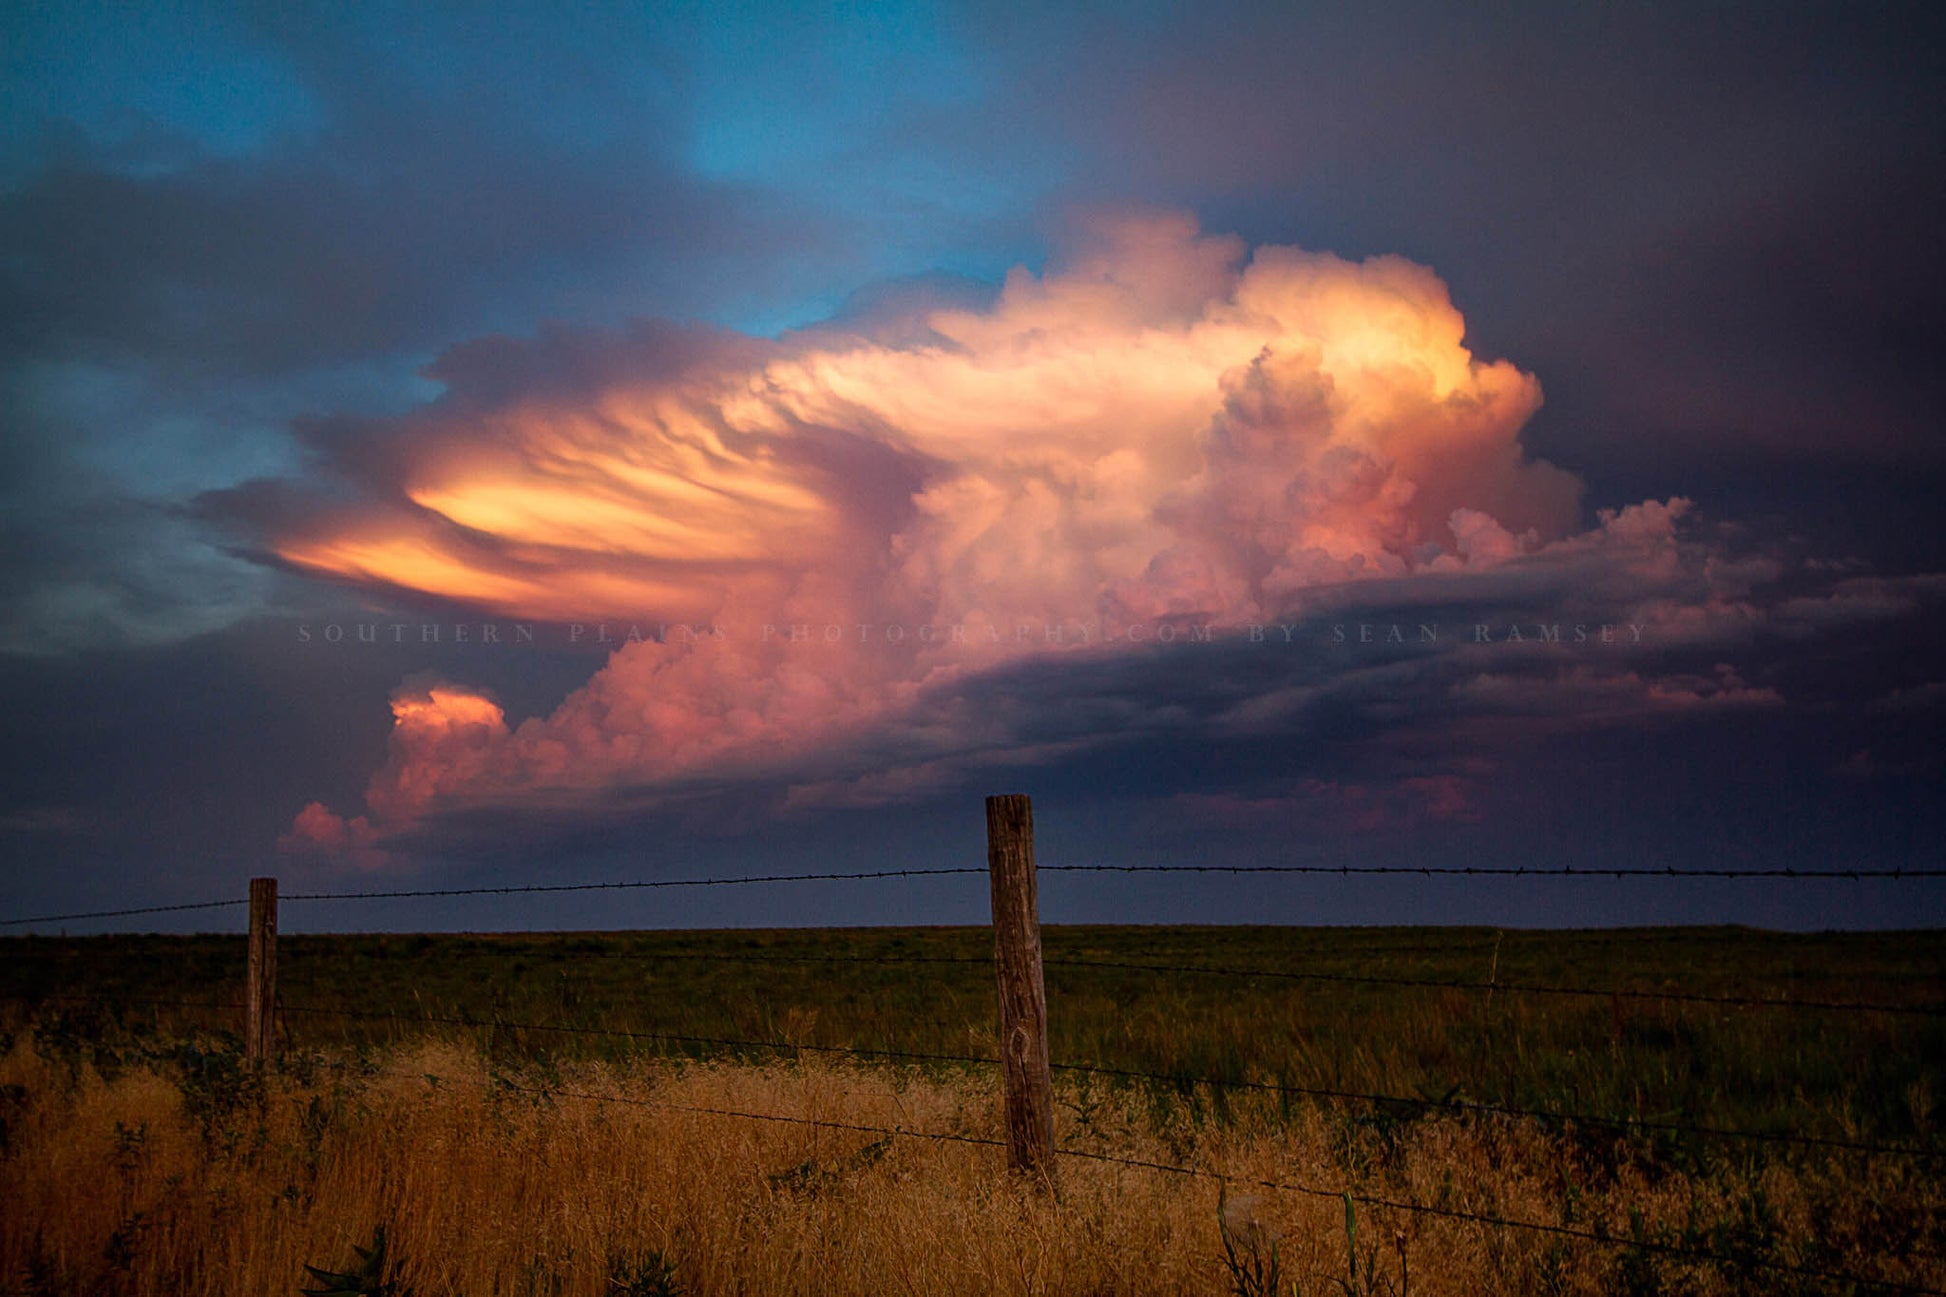 Storm photography print of a distant supercell thunderstorm drenched in sunlight over a barbed wire fence at sunset on a spring evening in Oklahoma by Sean Ramsey of Southern Plains Photography.